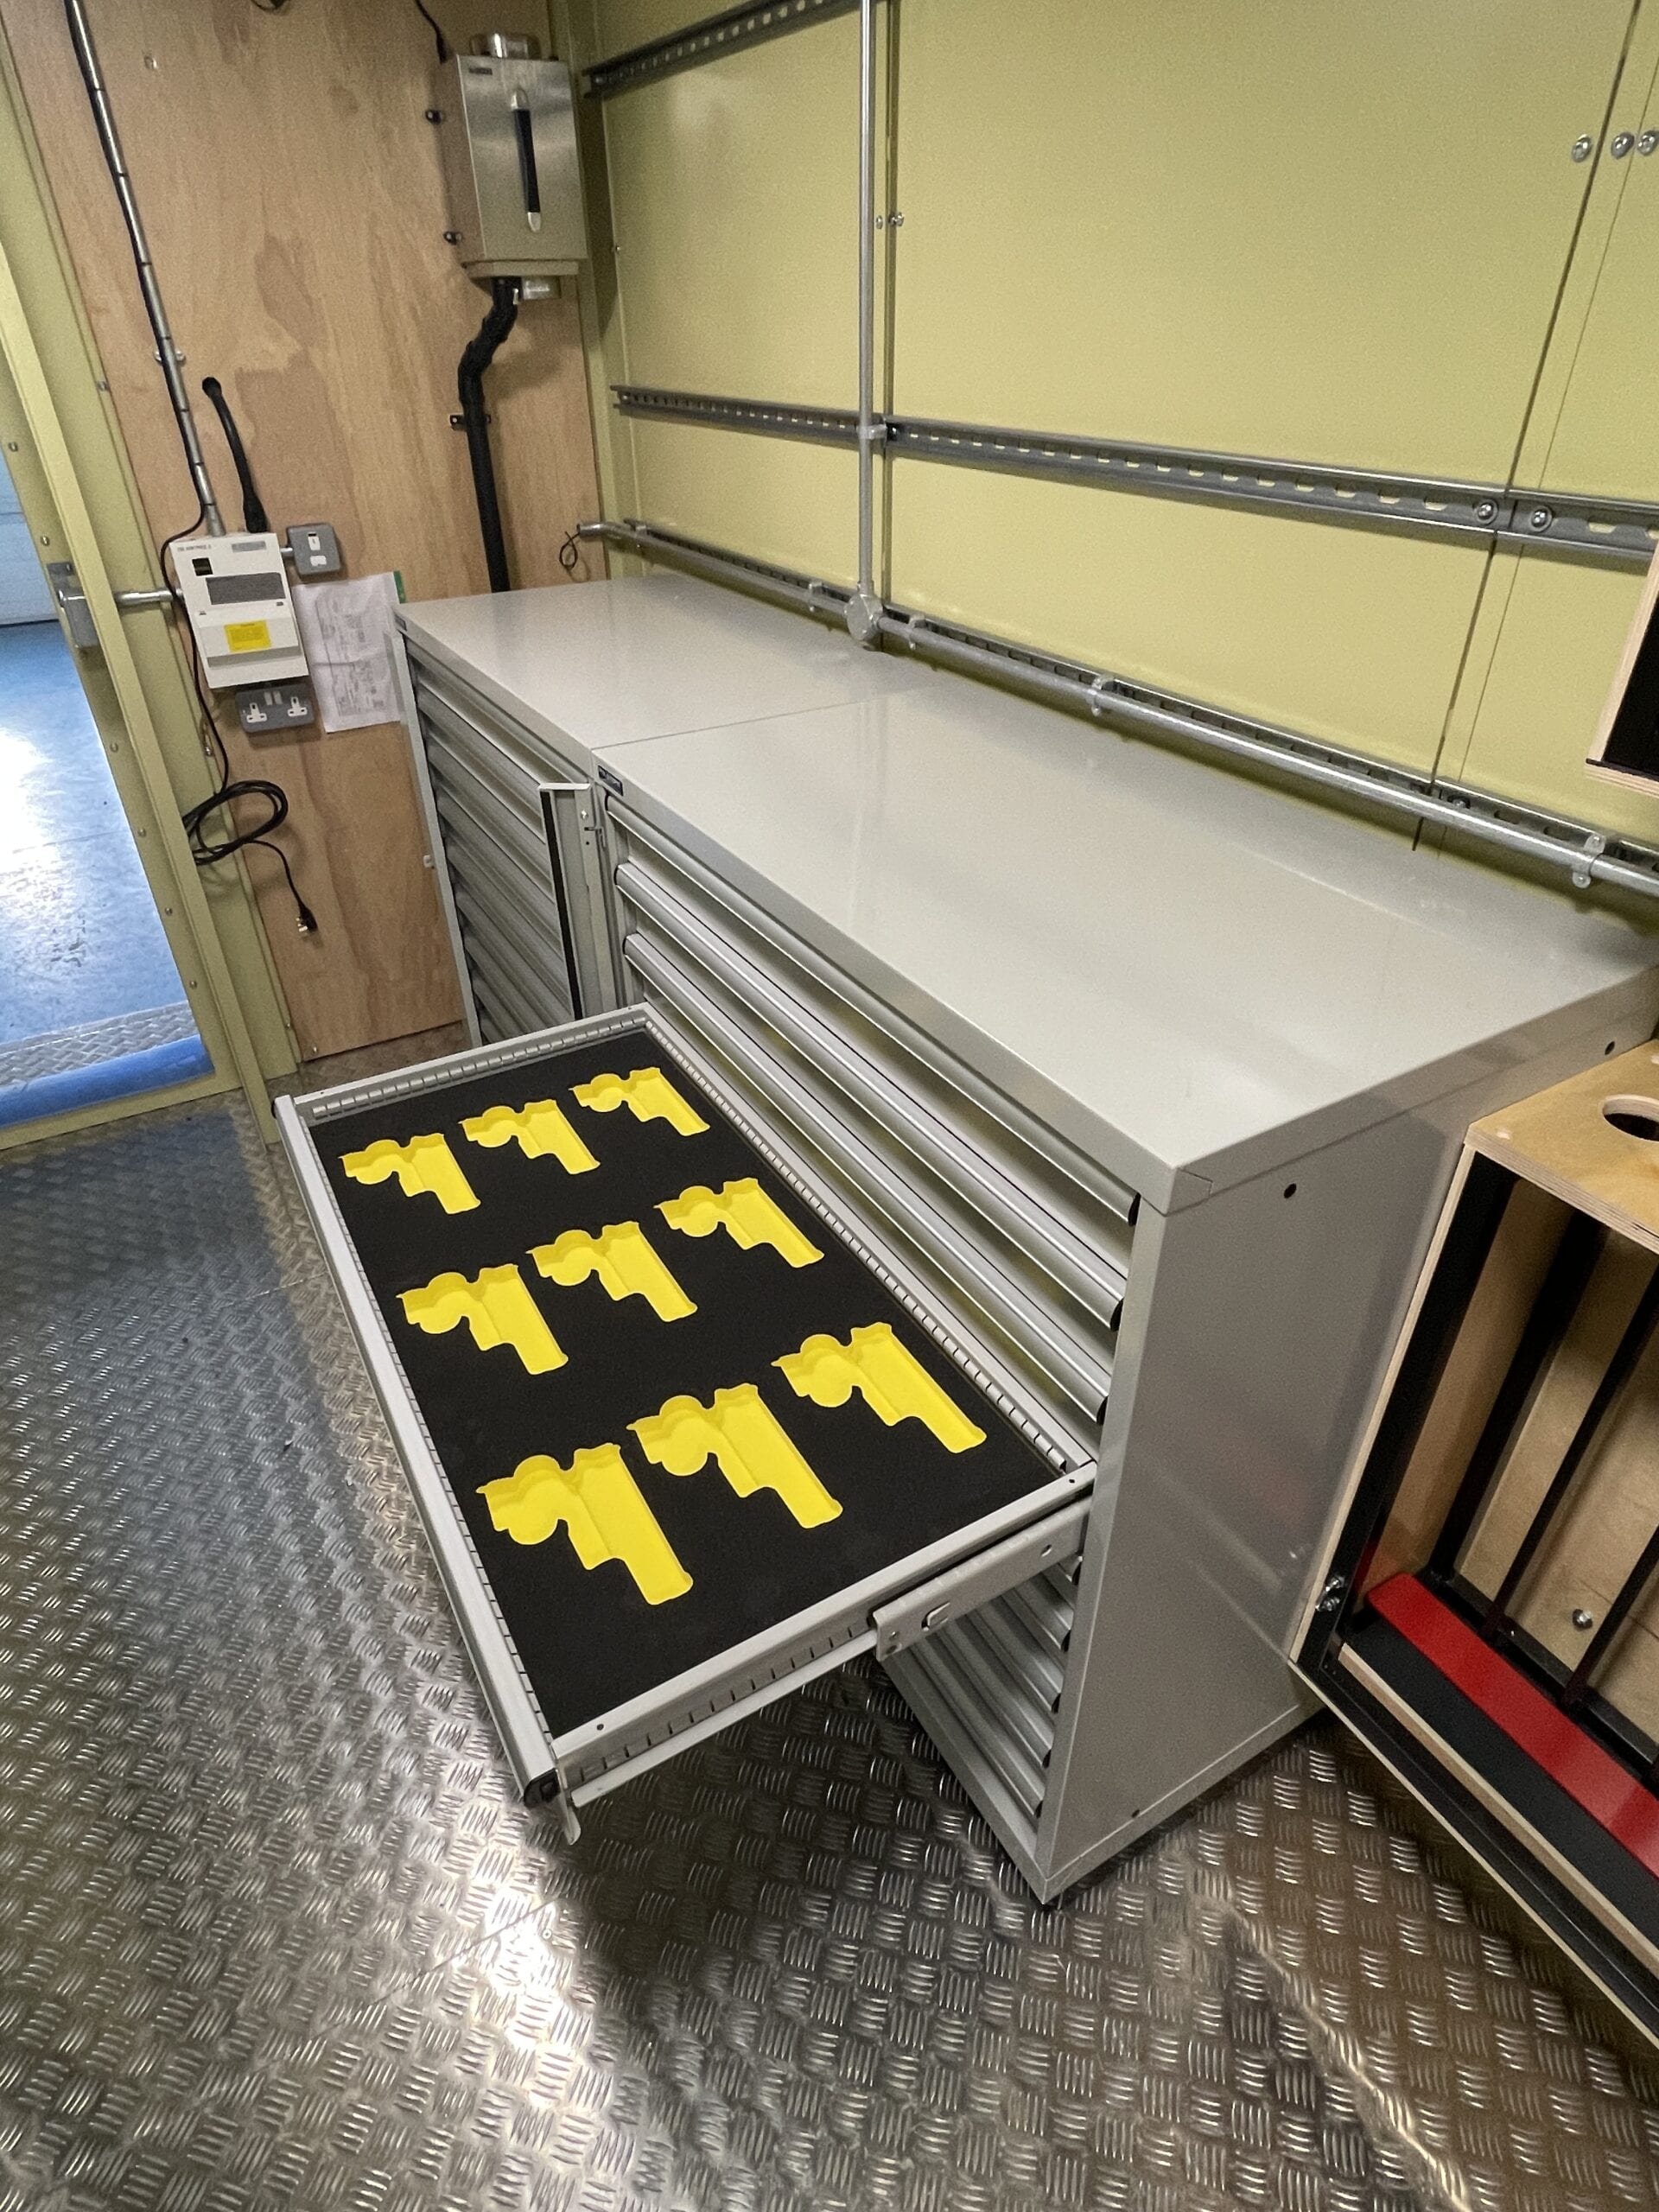 weapons storage in routed foam inserts